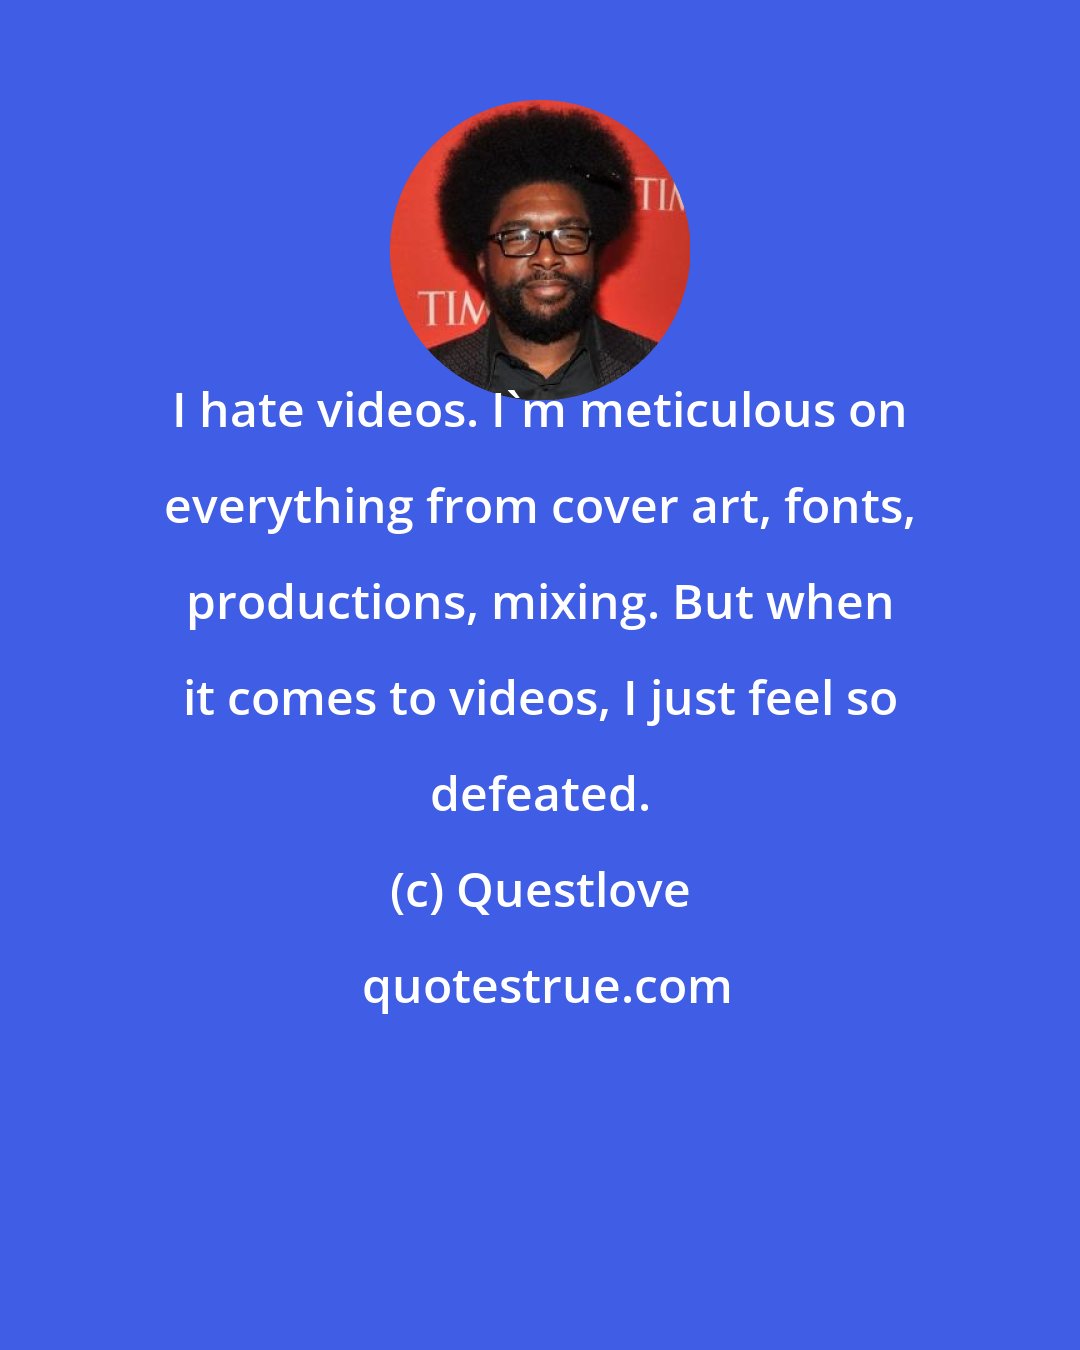 Questlove: I hate videos. I'm meticulous on everything from cover art, fonts, productions, mixing. But when it comes to videos, I just feel so defeated.